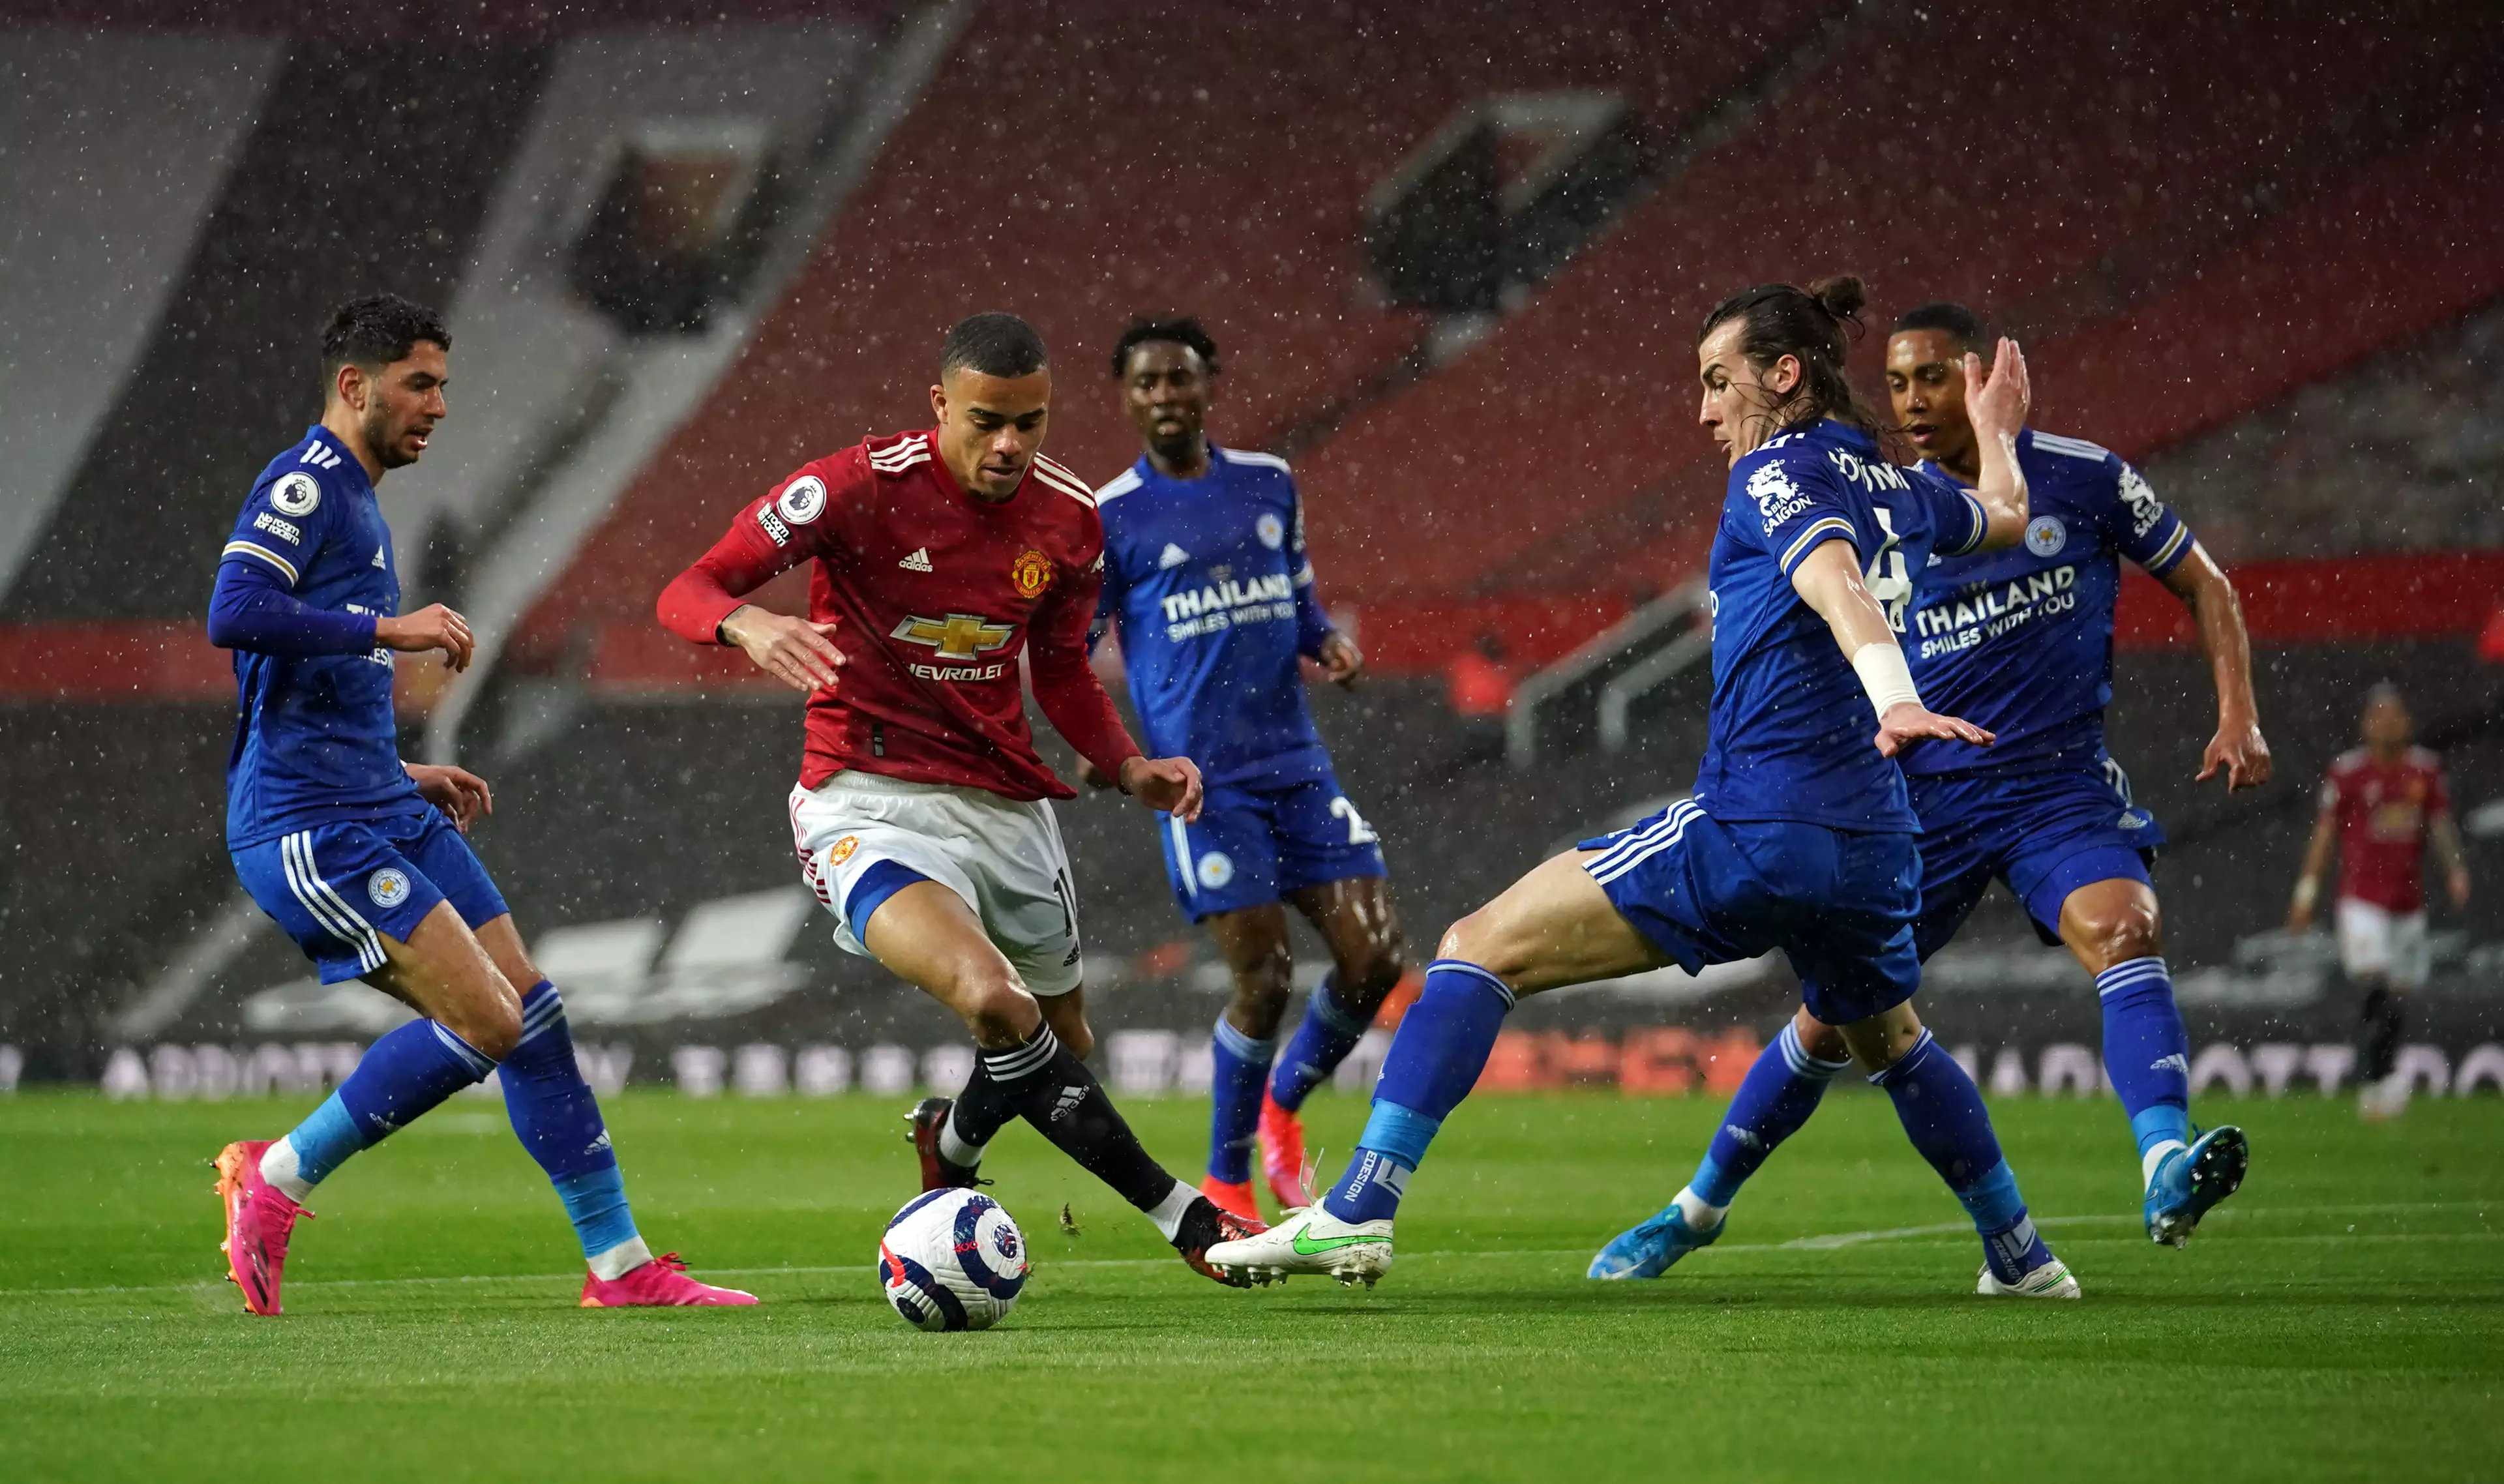 Greenwood has proved a tricky customer for Premier League defenders. Image: PA Images